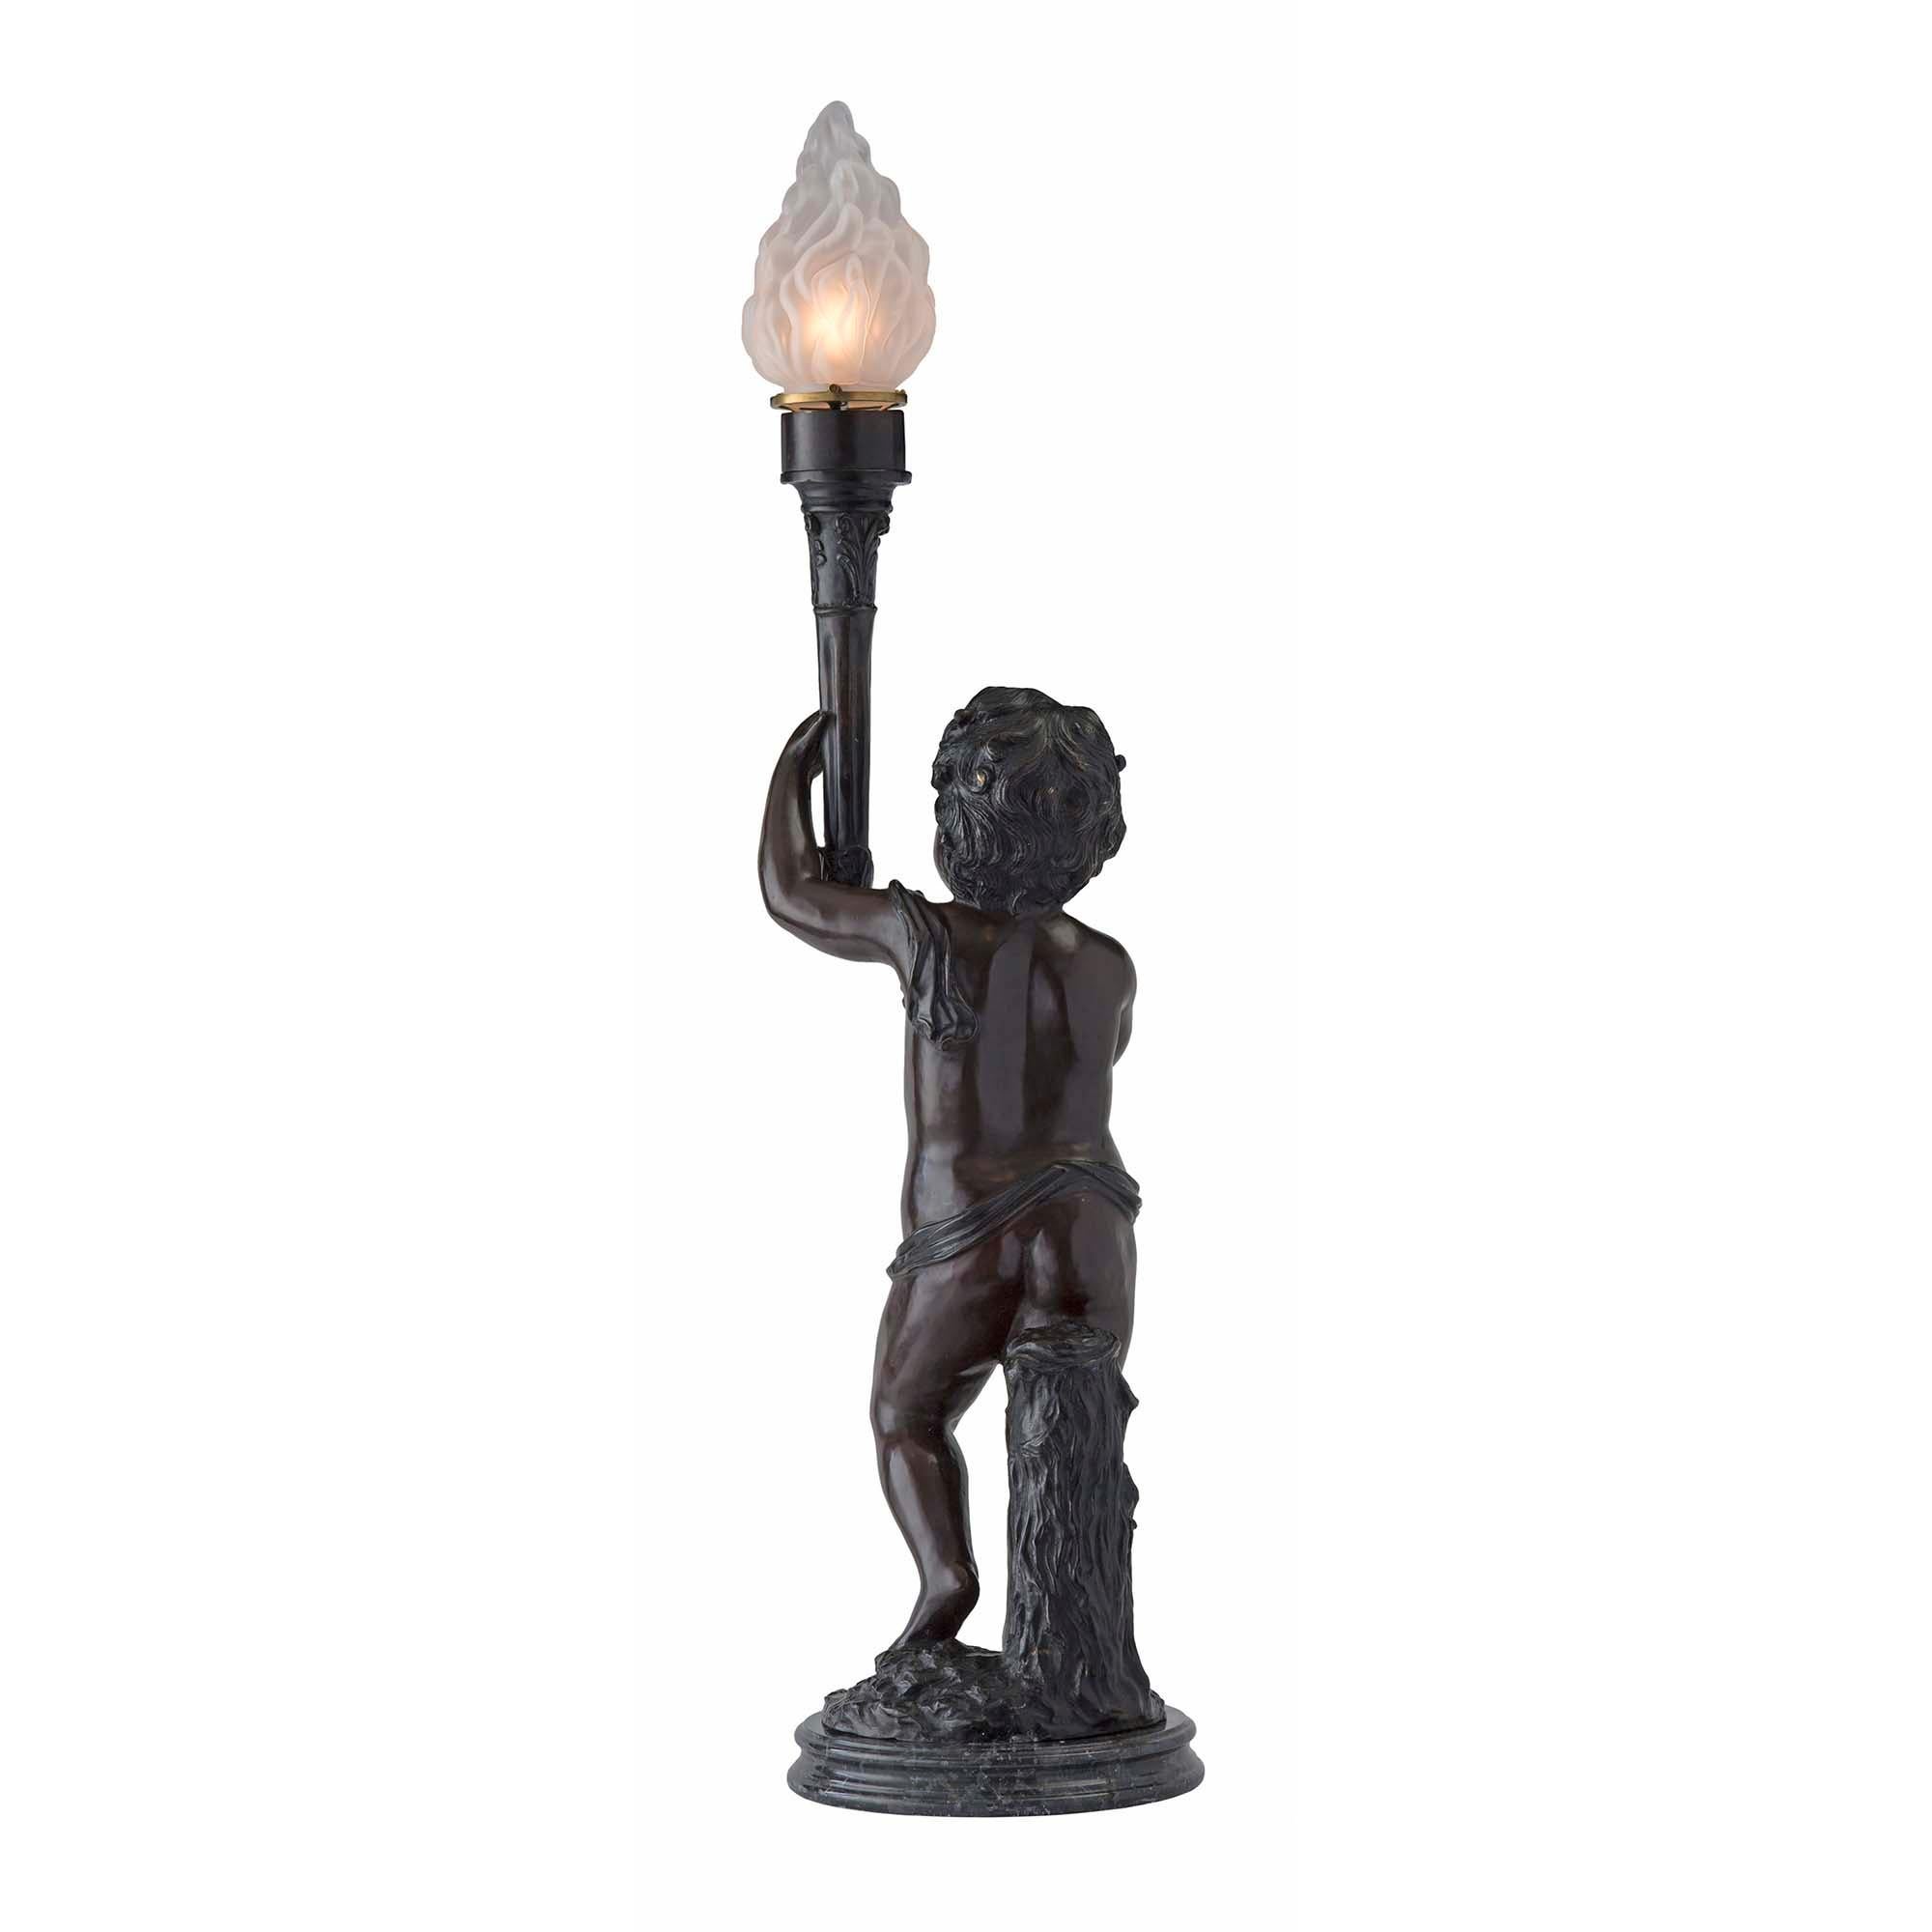 A pair of very attractive French turn of the 20th century patinated bronze statues of a young boy and girl mounted into lamps, signed Moreau. Each lamp is raised on a circular moulded marble base. The statues are set on a terrain design with one arm